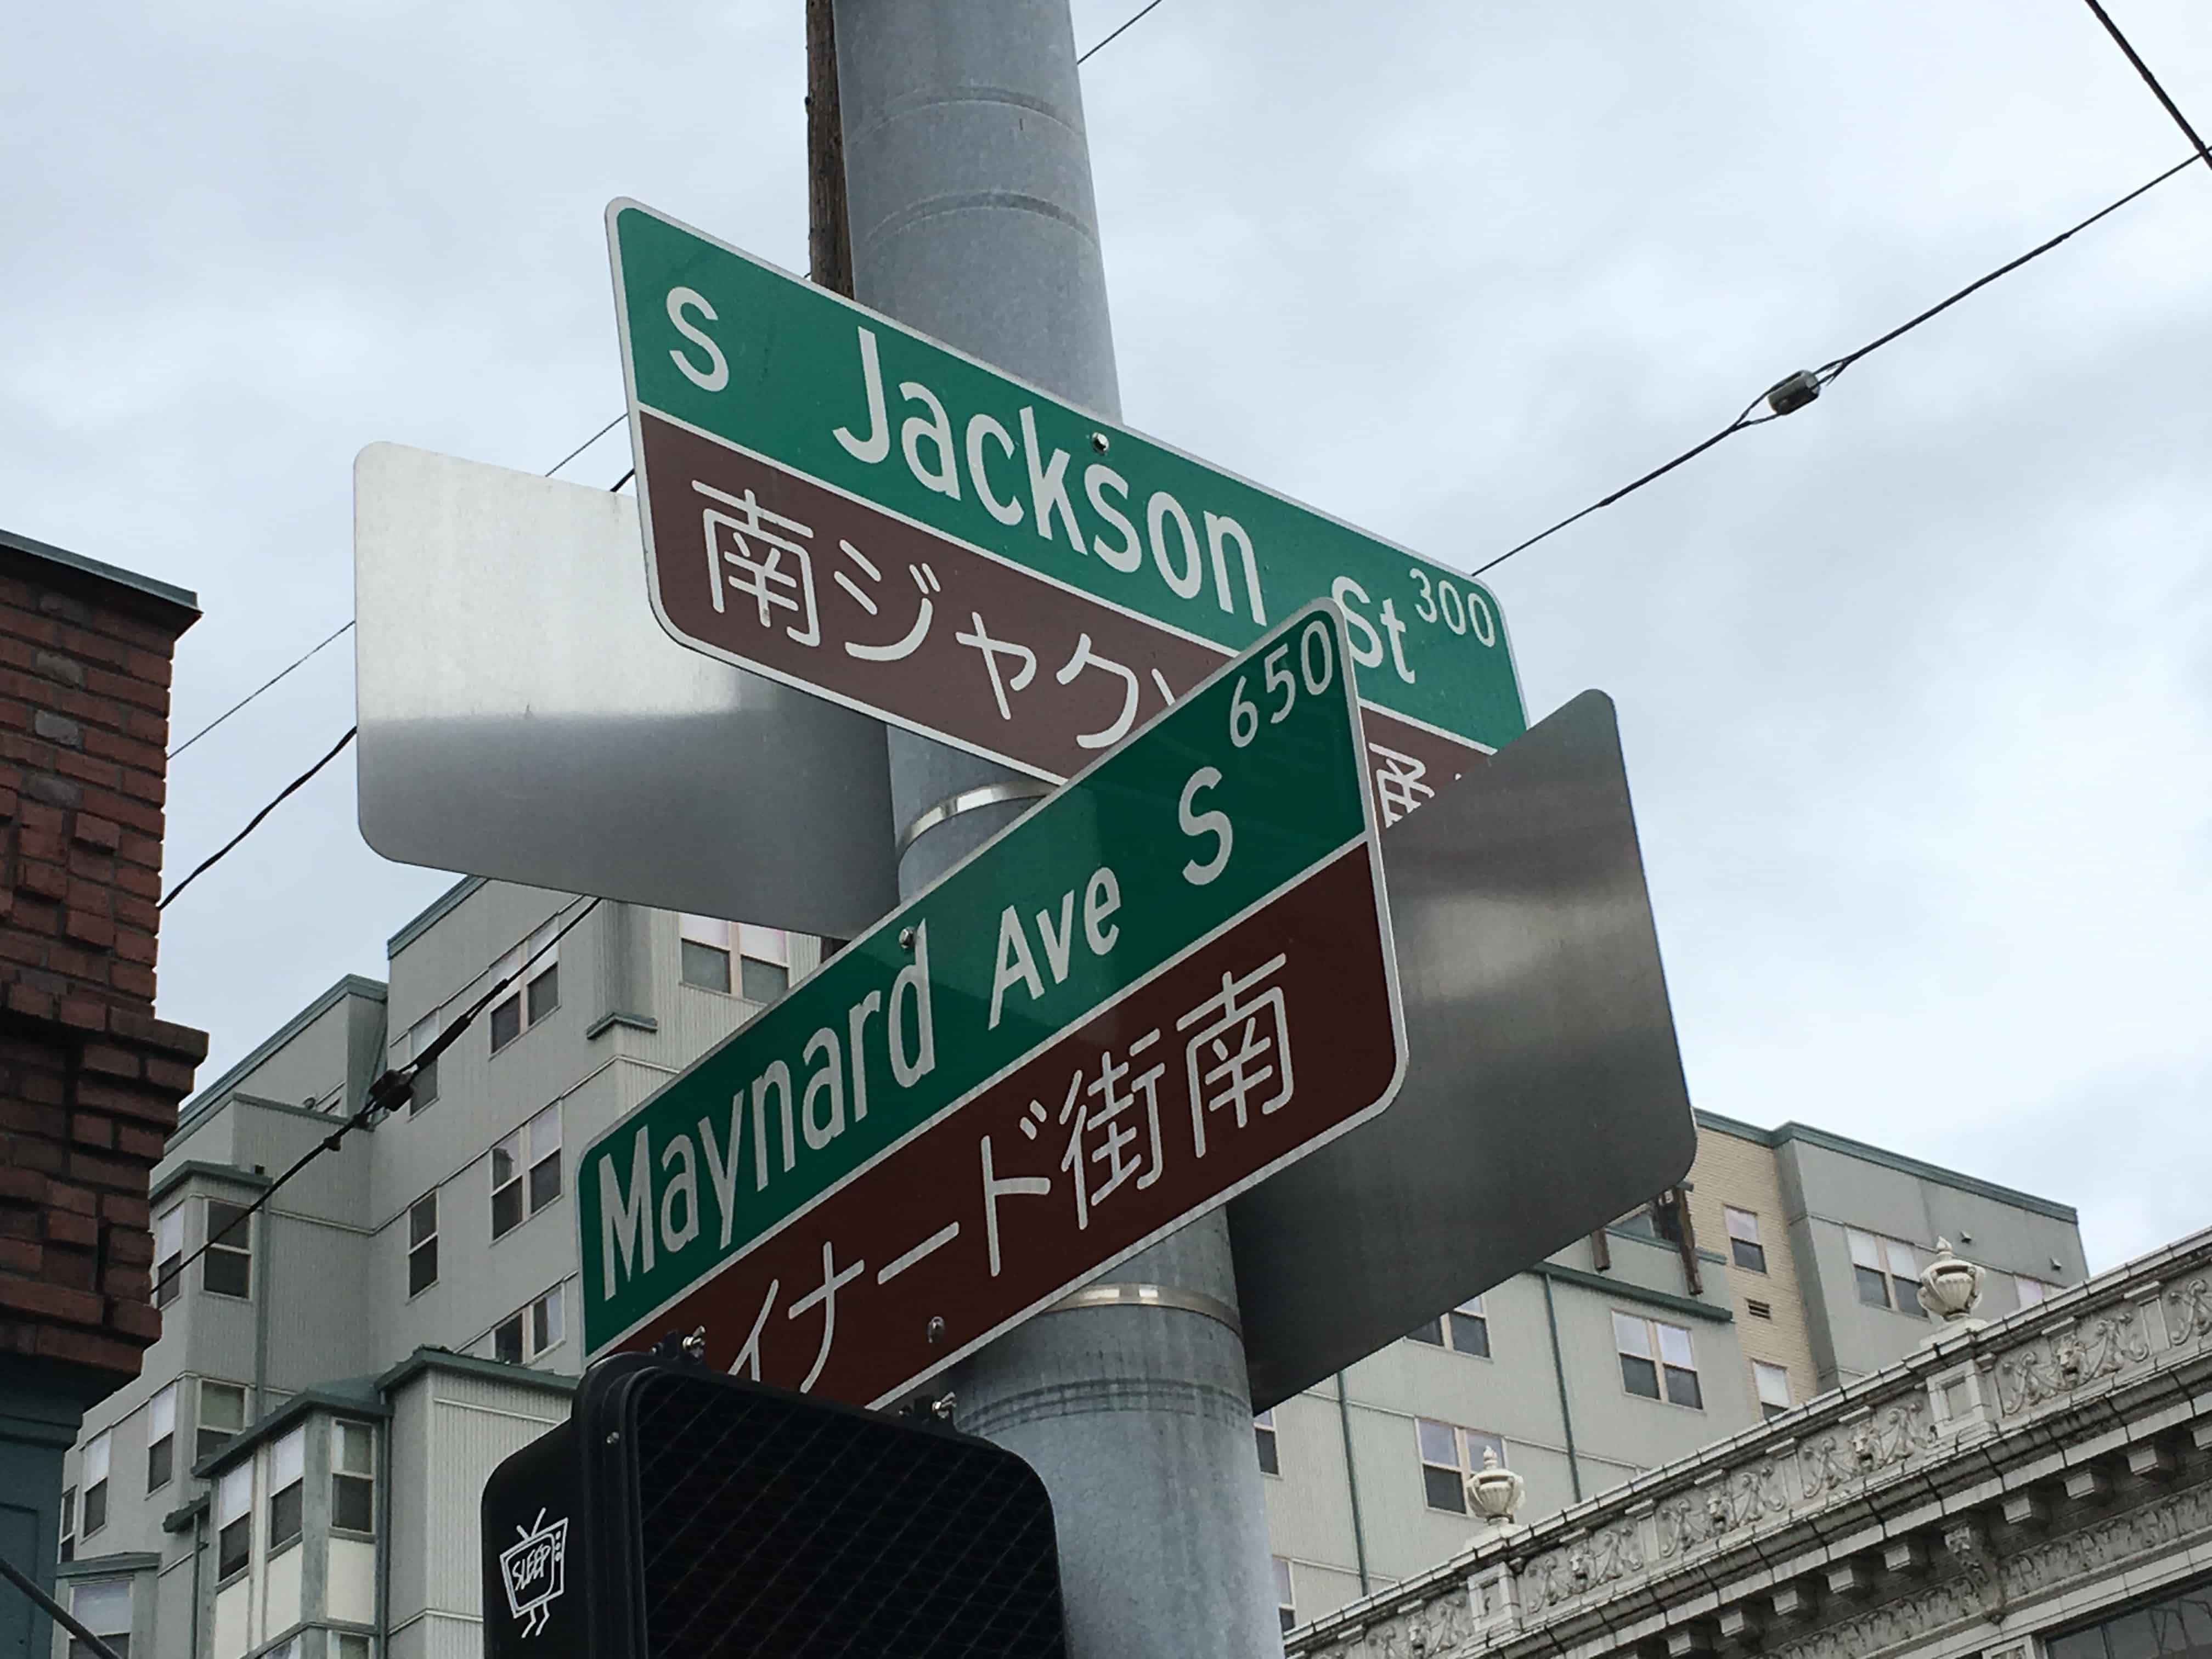 Street signs in the International District in Seattle, Washington